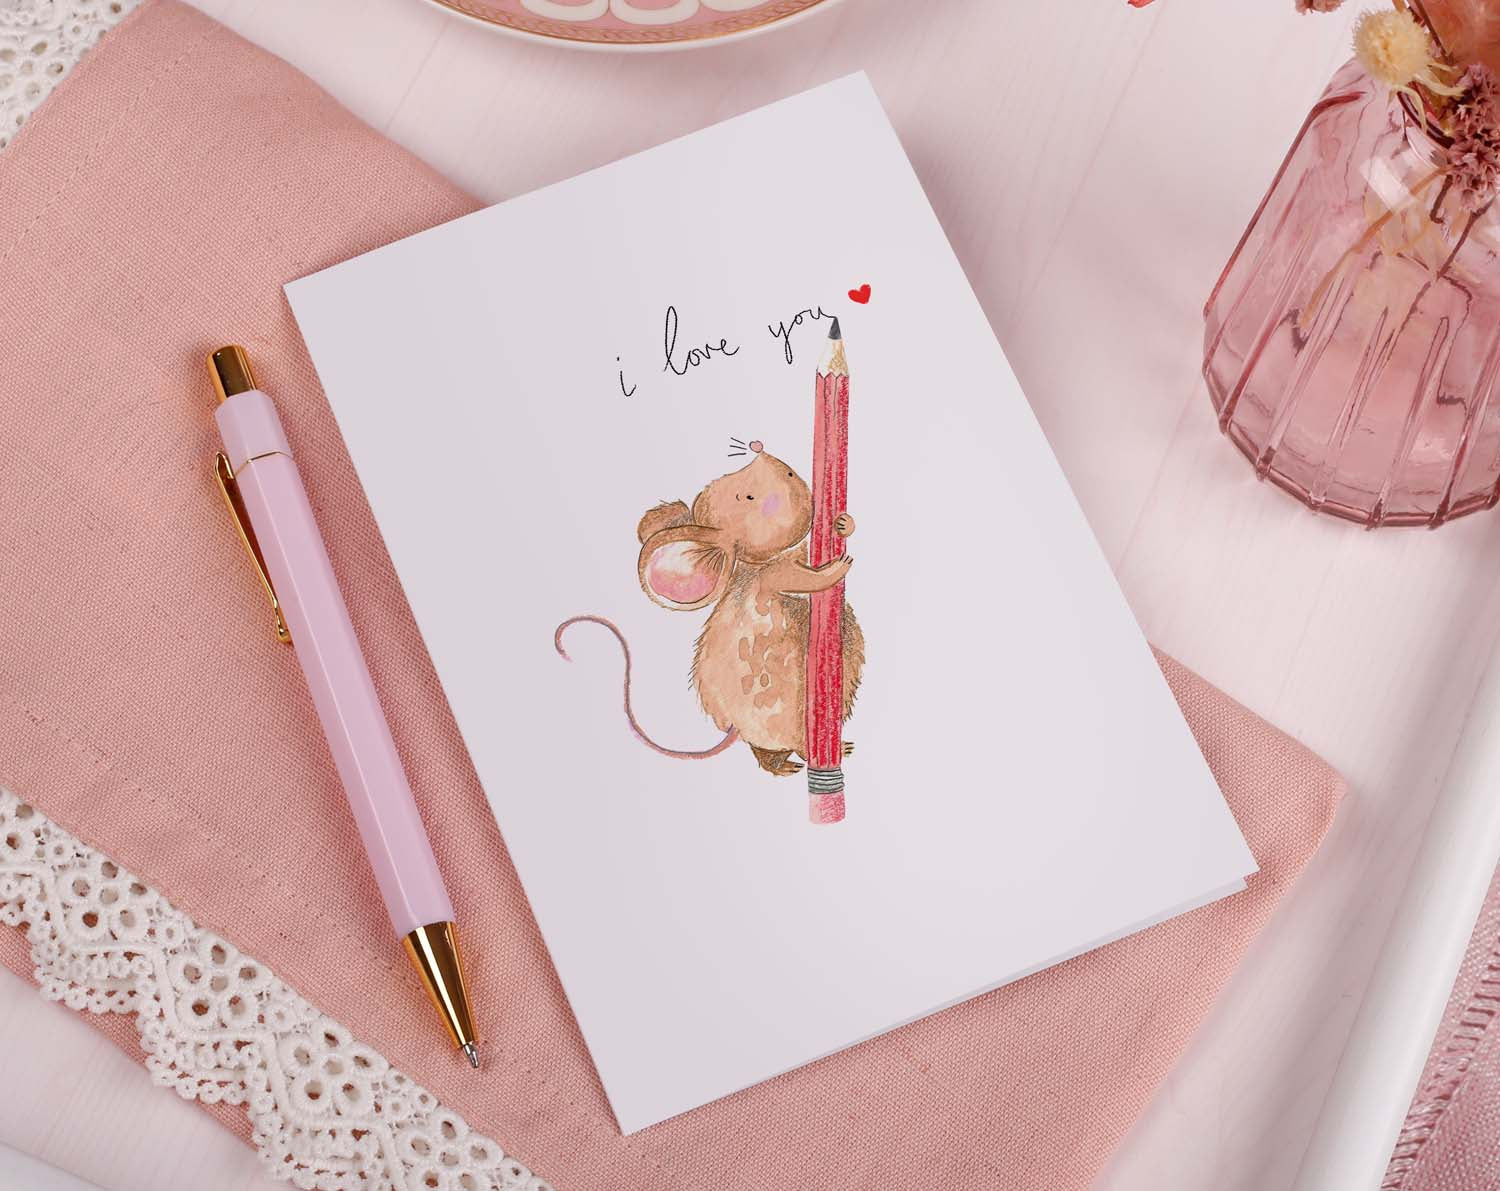 Cute I Love You Card, with watercolour mouse on it